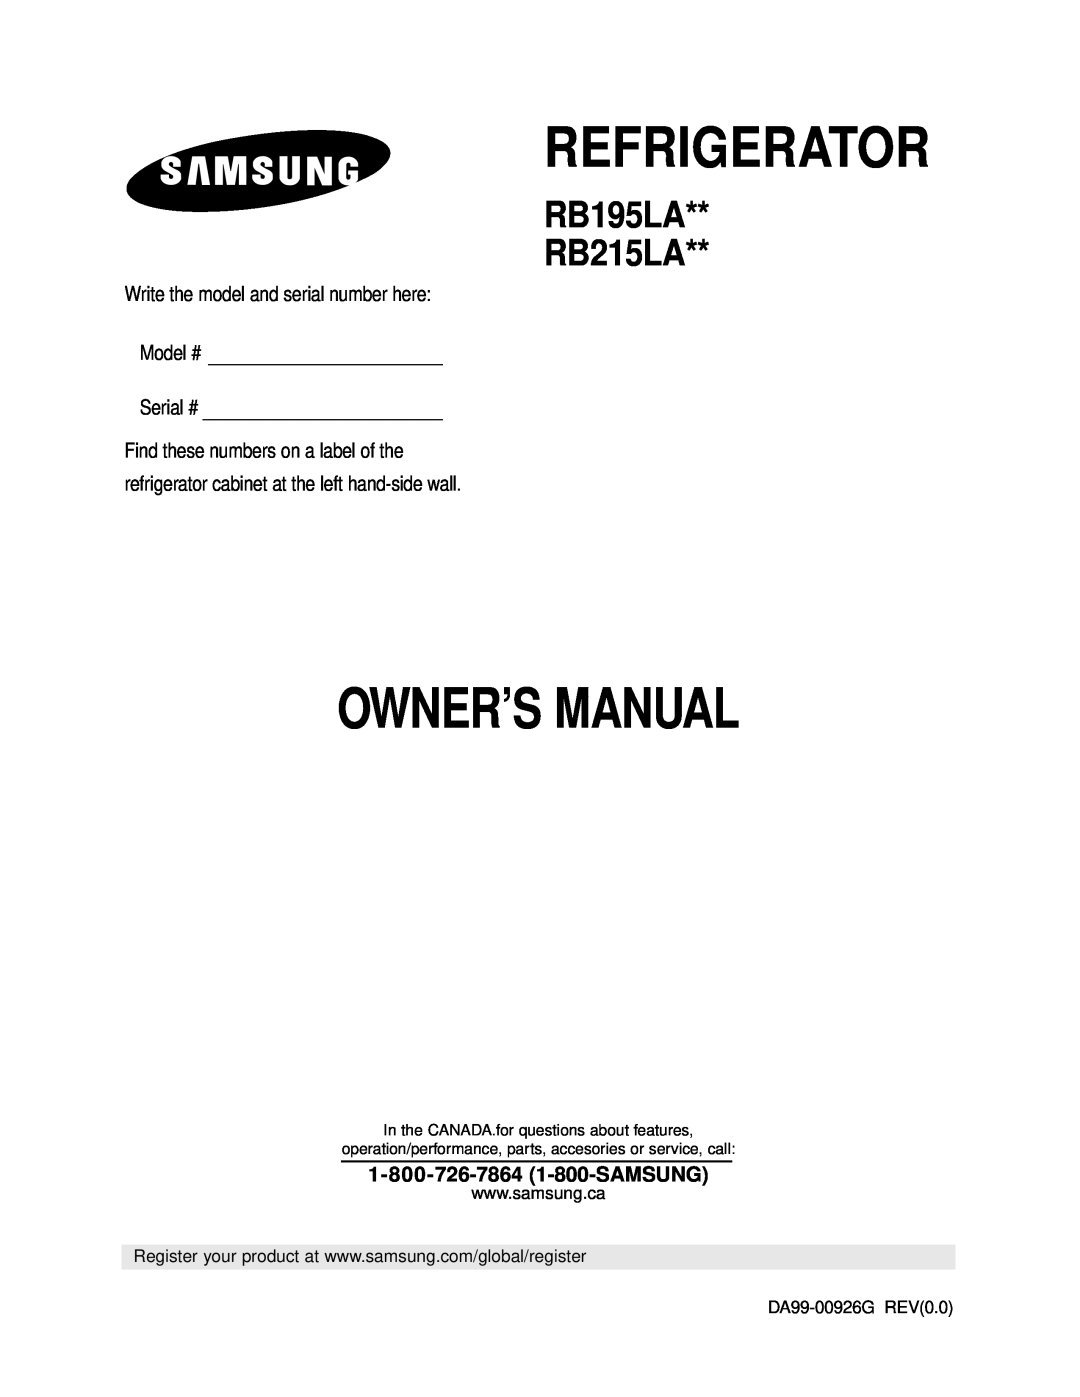 Samsung RB195LA owner manual Write the model and serial number here Model # Serial #, Refrigerator, Owner’S Manual 